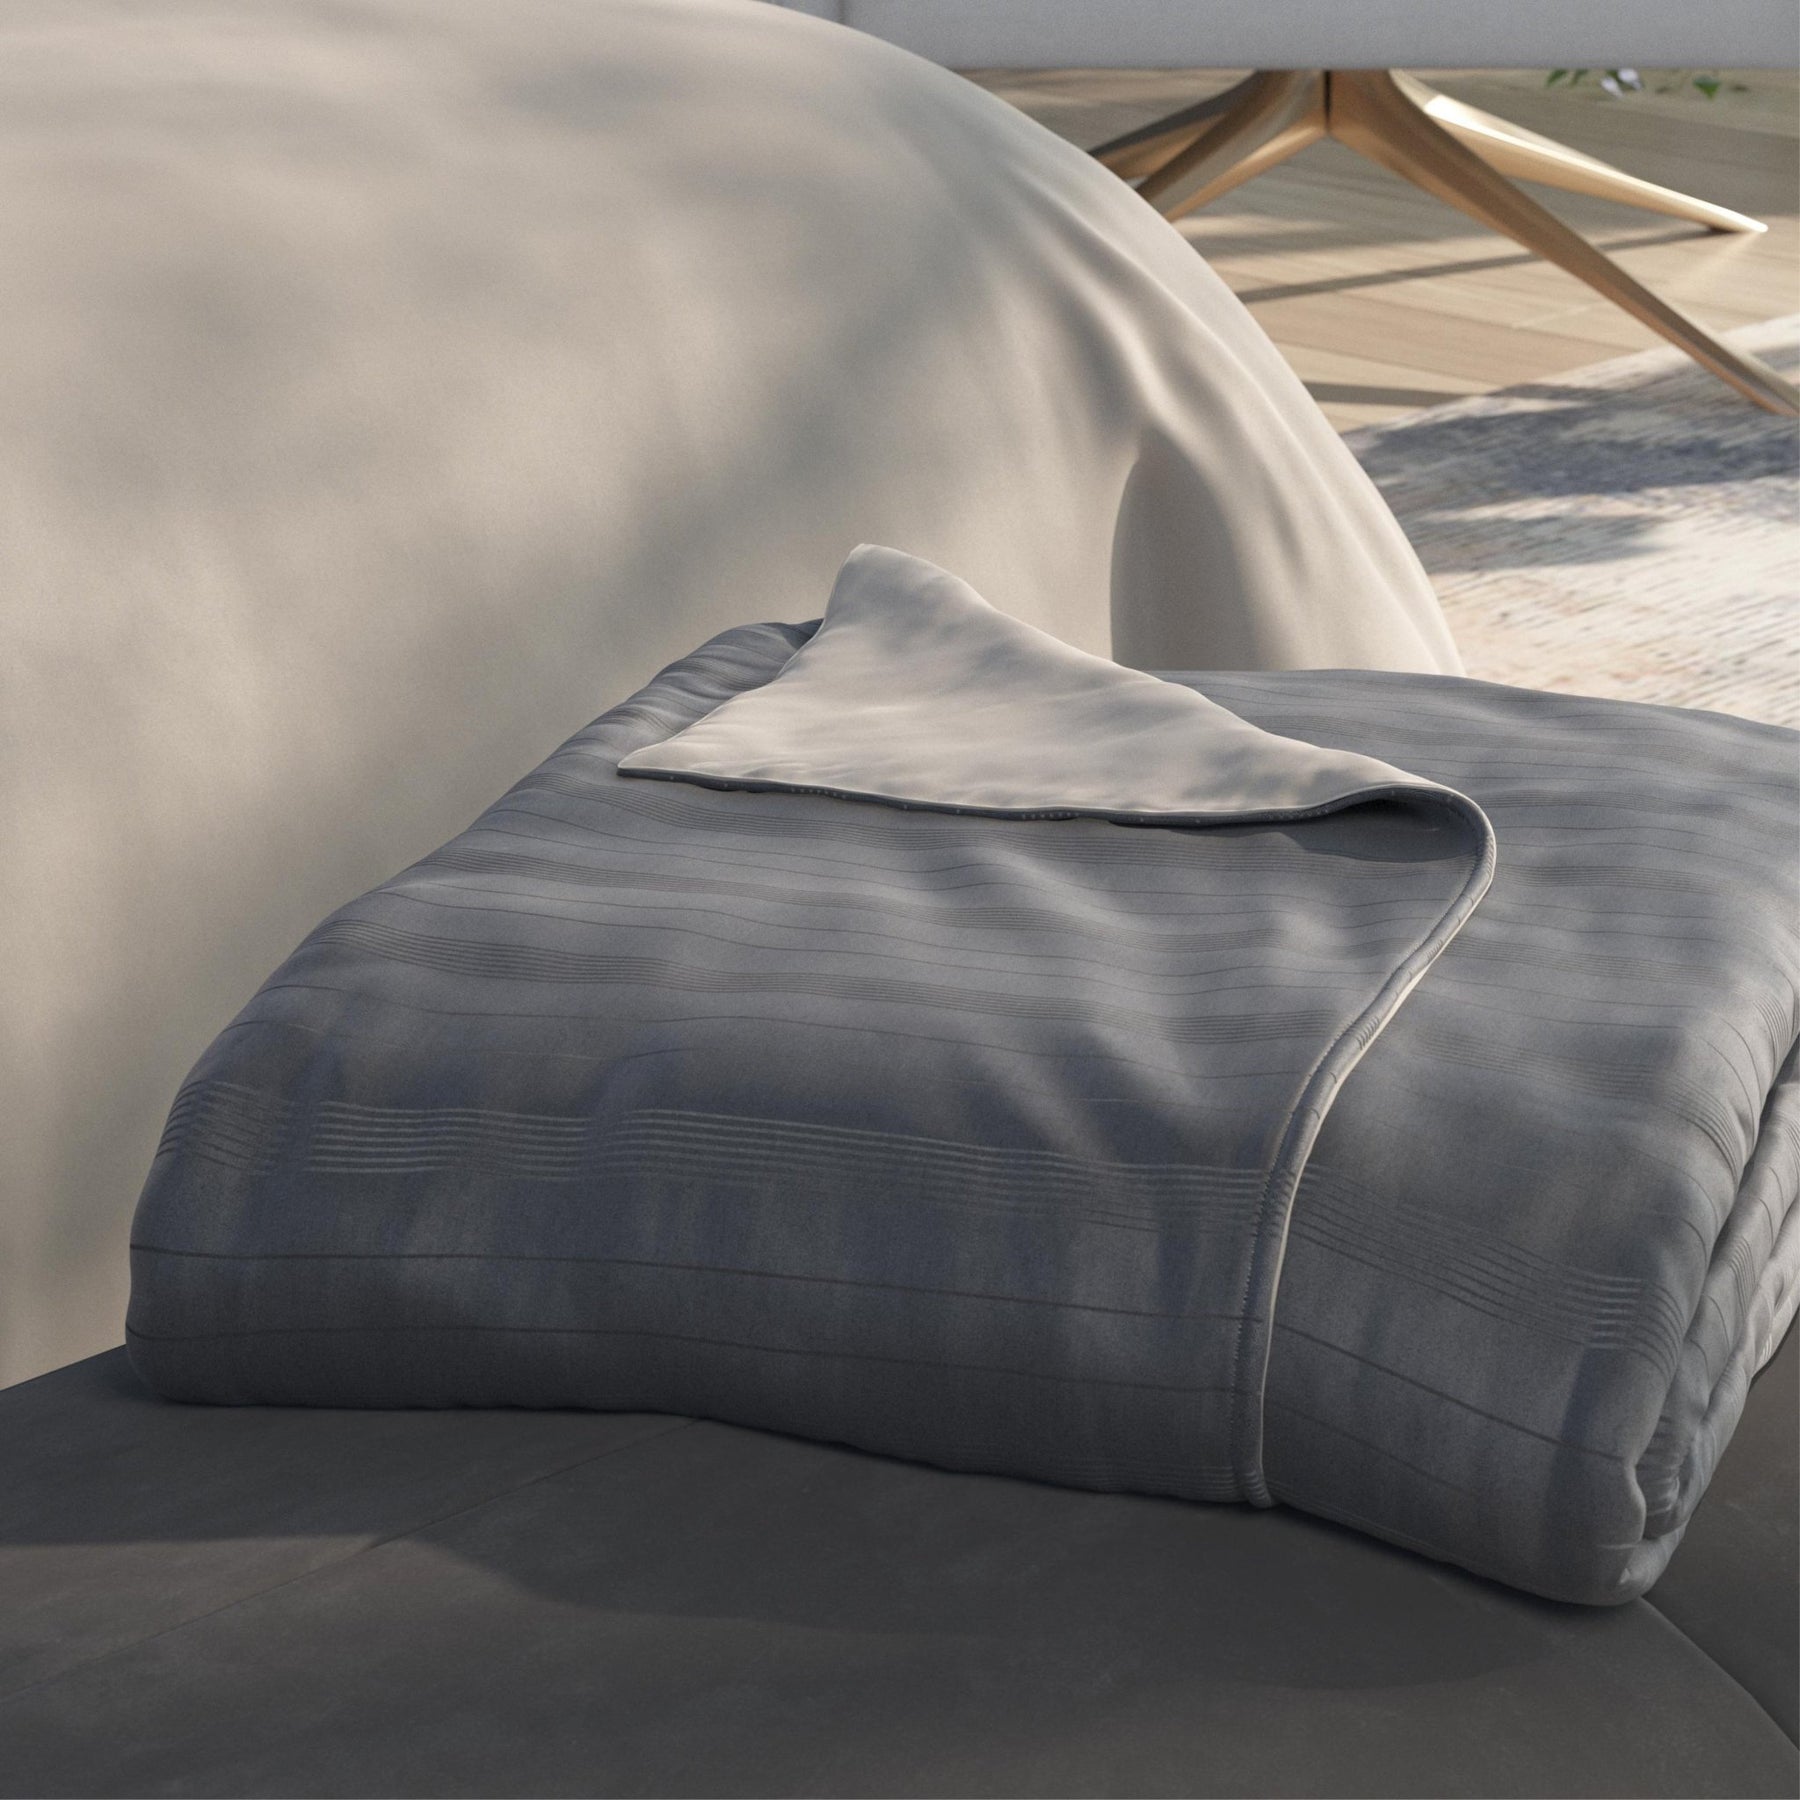 Duvet Cover + Cooling/Bamboo